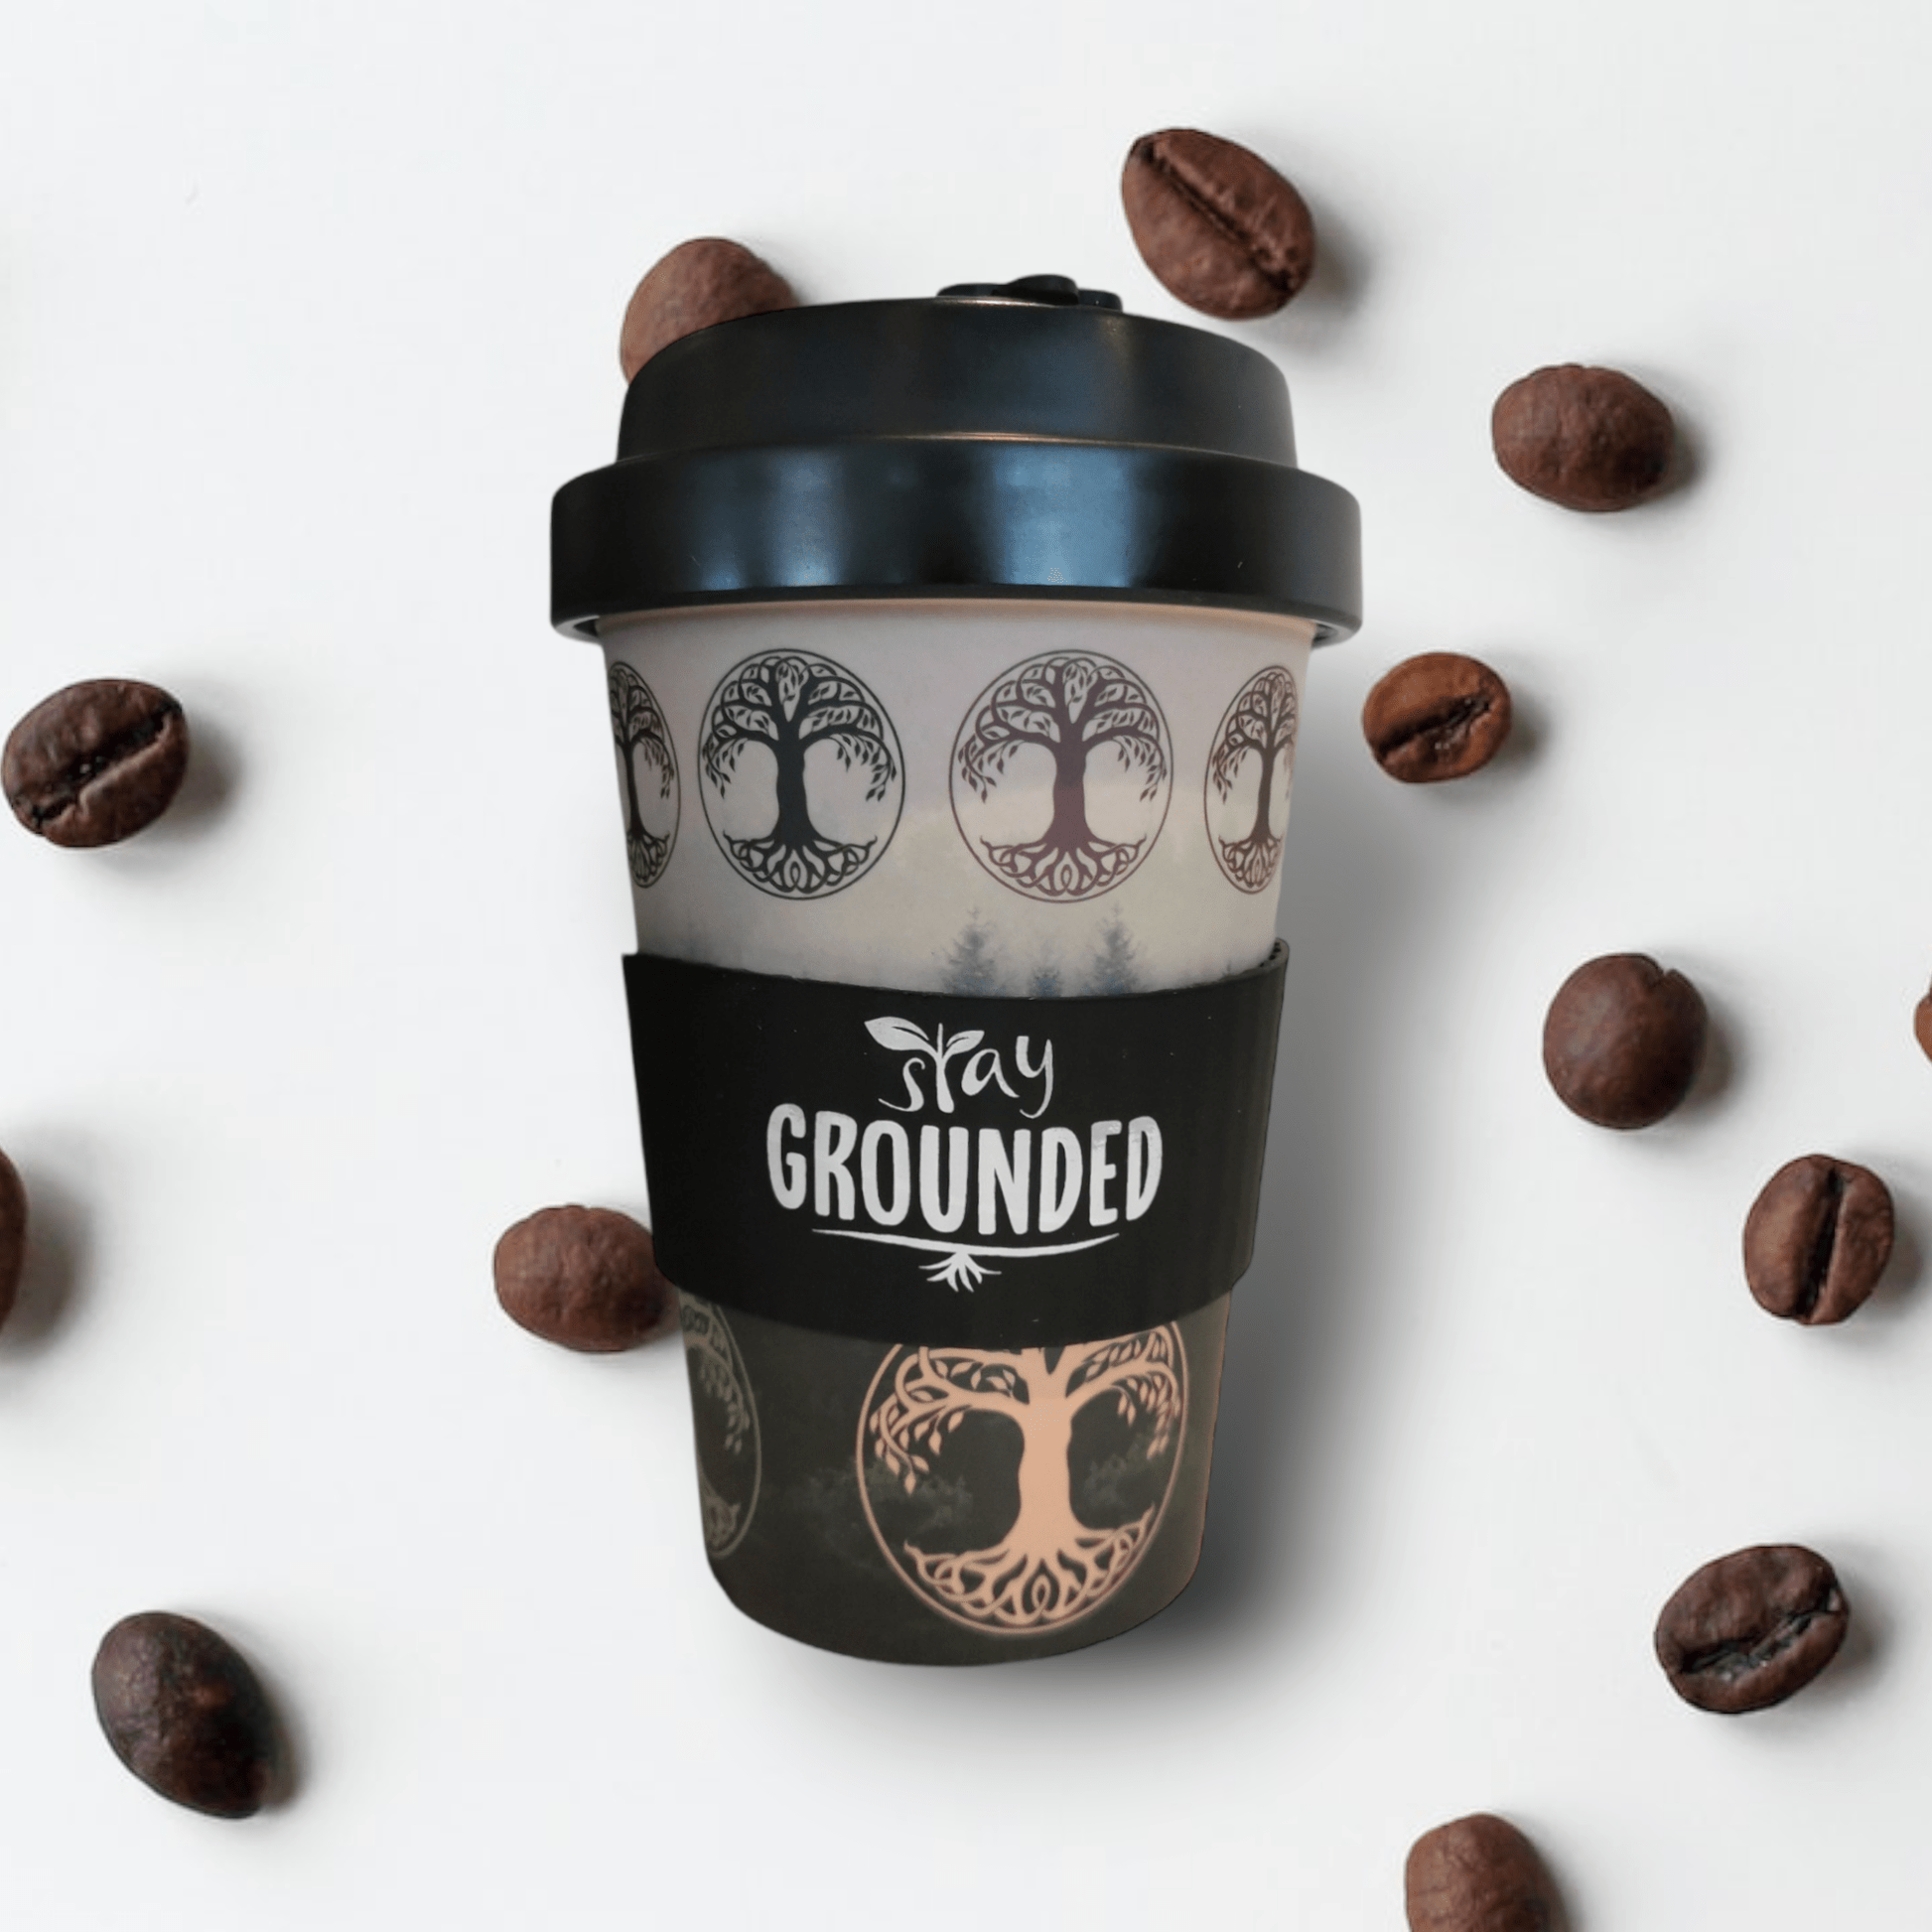 Sulphur City Soapery Coffee & Tea Cups Stay grounded, Eco-to-go cup.